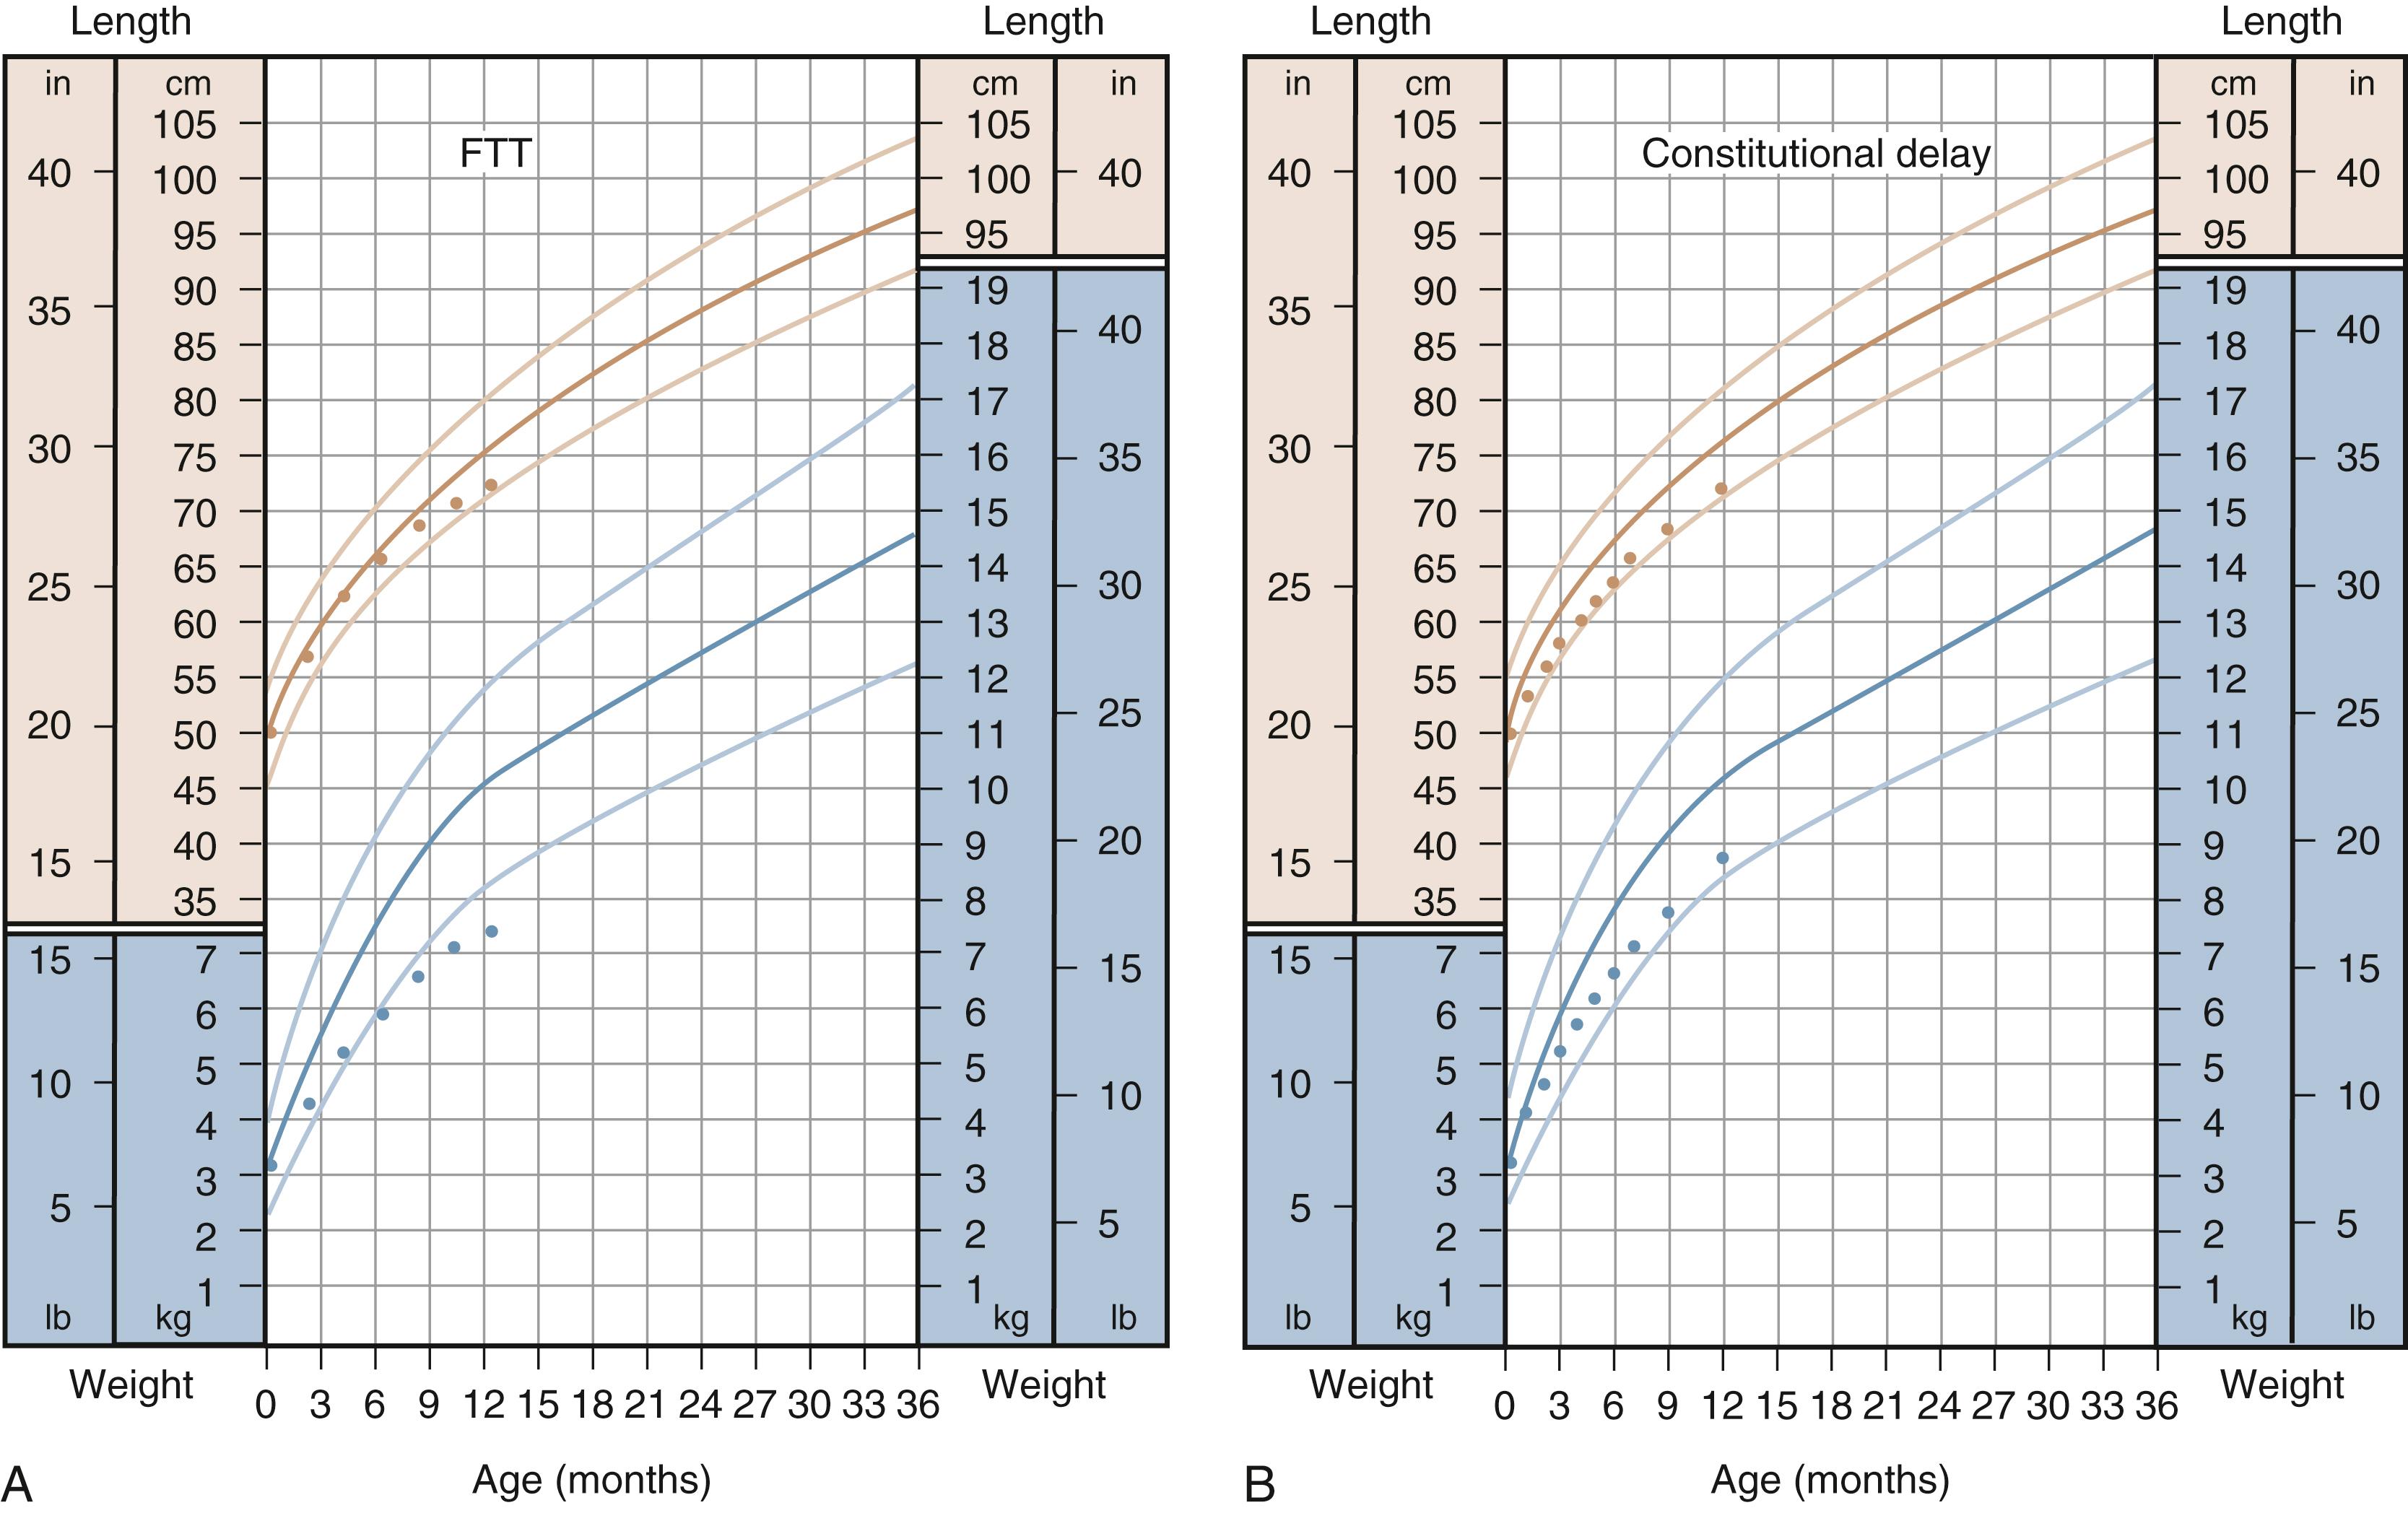 Fig. 11.8, Examples of growth curves. (A) Typical failure to thrive (FTT) with deceleration of weight gain. (B) Slow growth but at a normal rate consistent with constitutional delay.